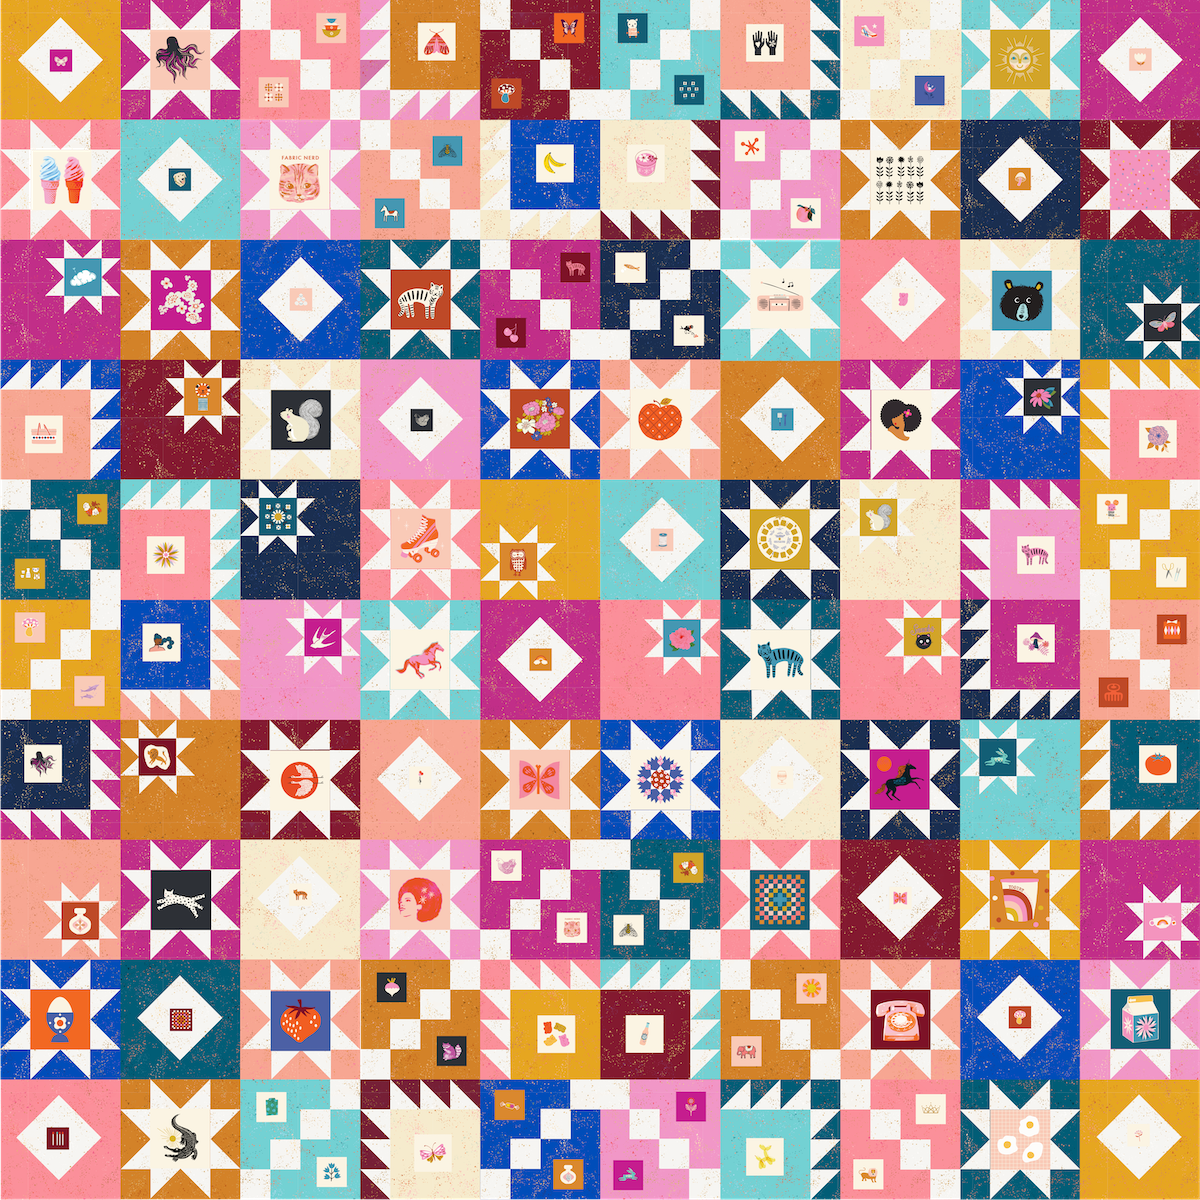 PRE-ORDER 10 Years of Magic Quilt Kit // Ruby Star Society